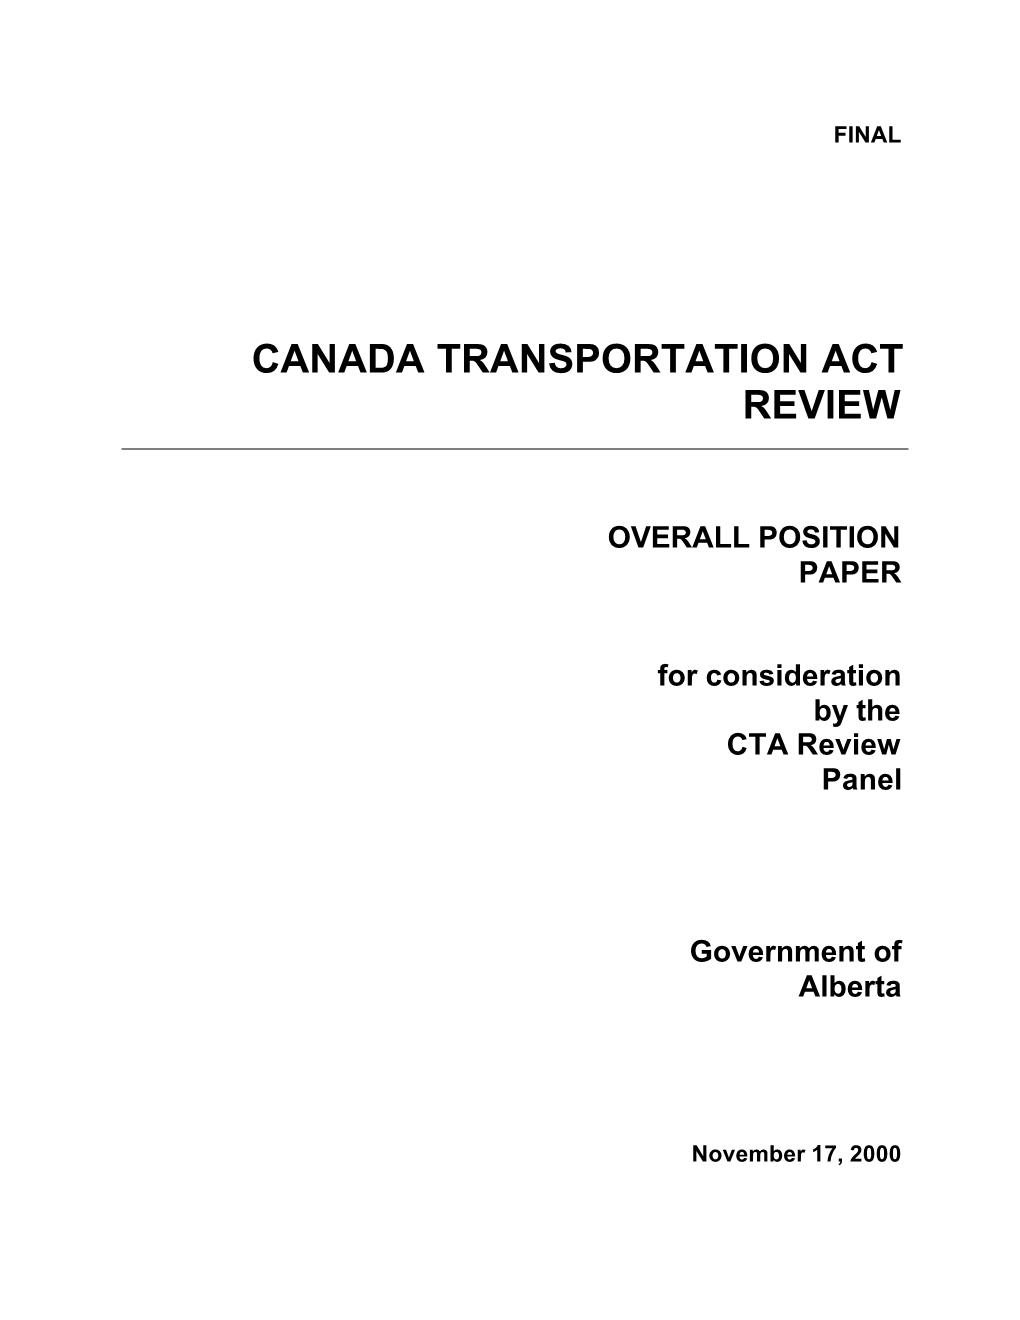 Canada Transportation Act Review